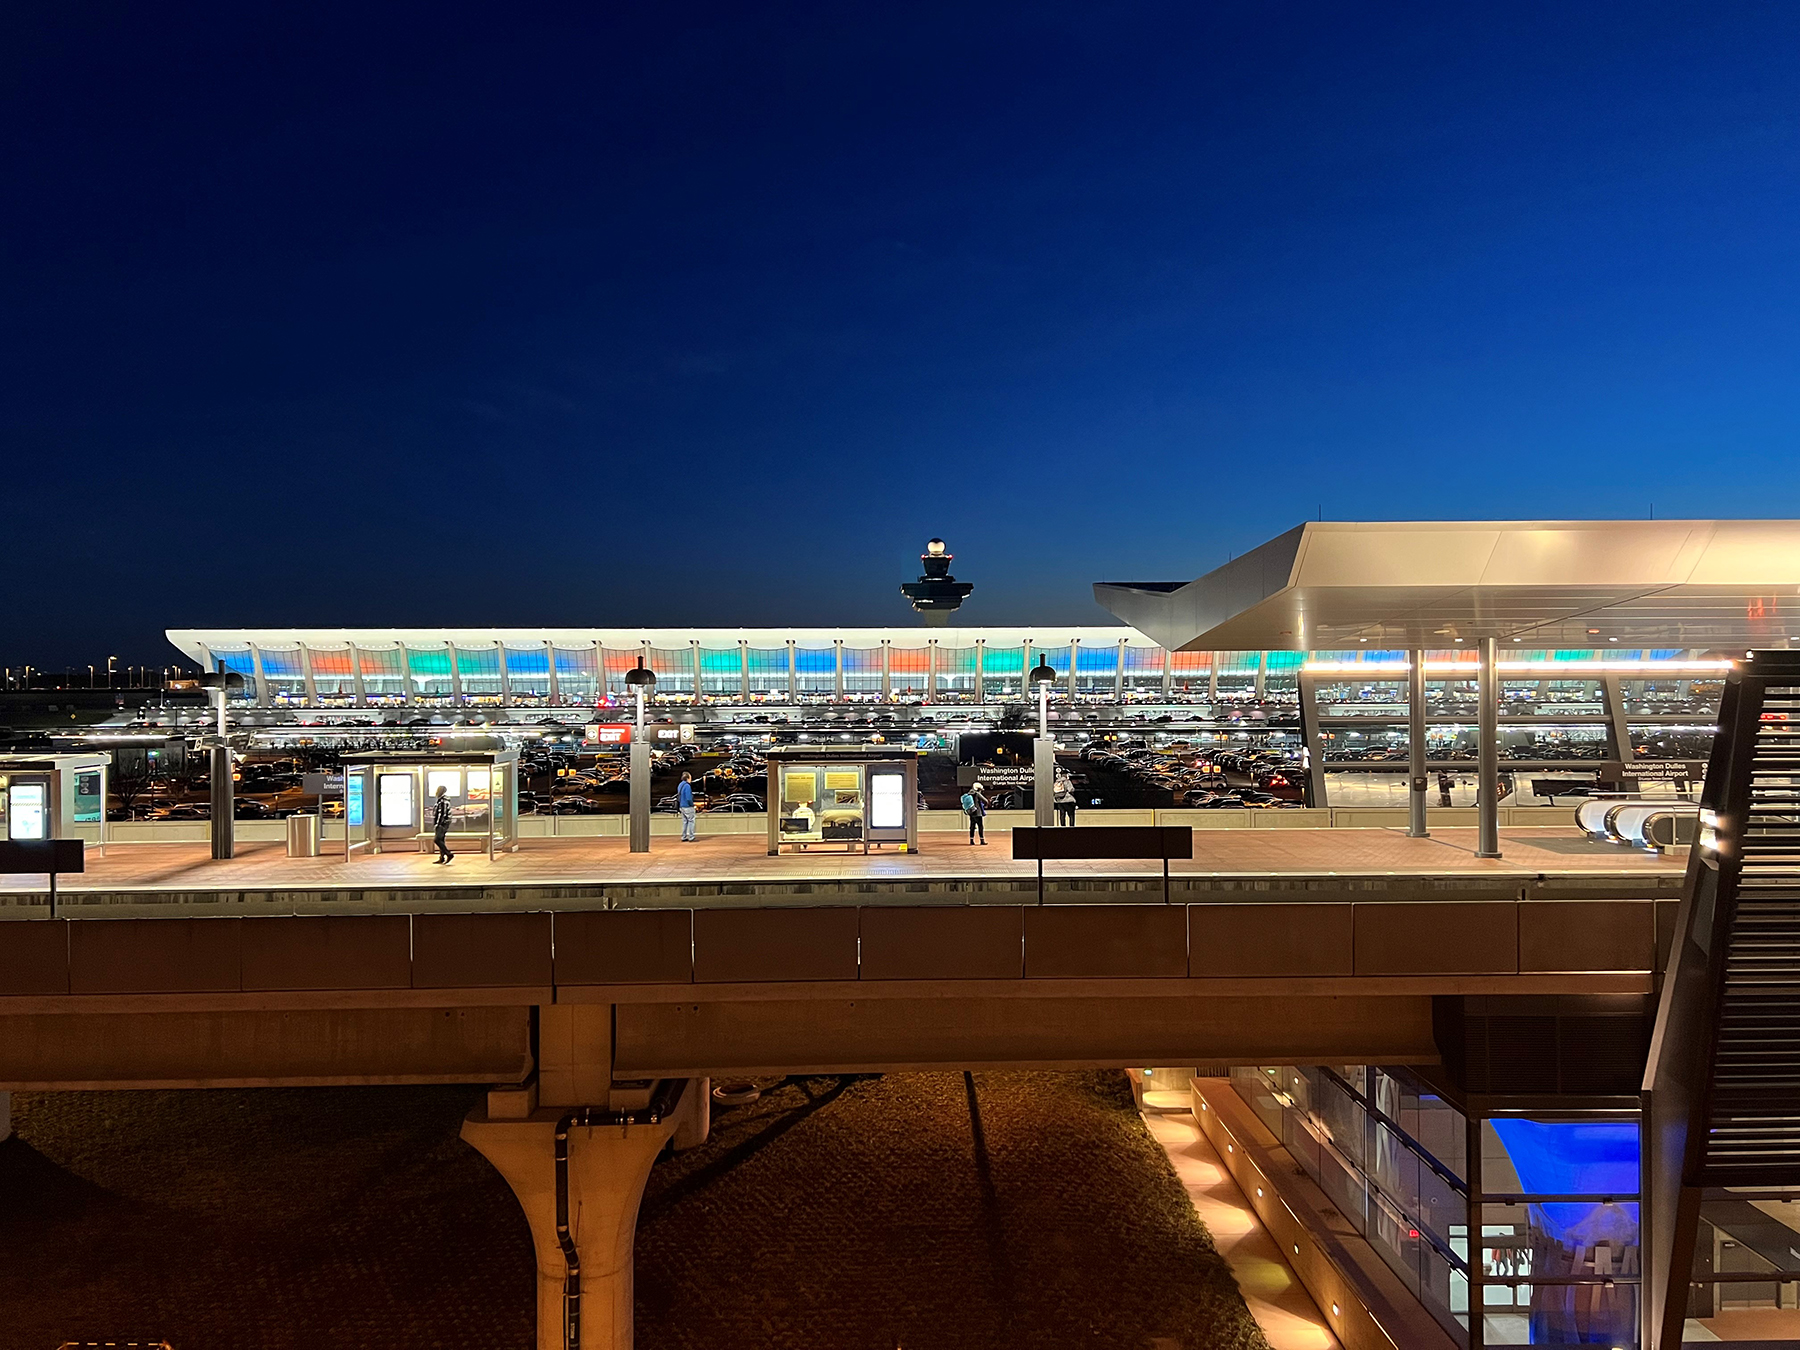 The Silver Line extension includes an approximately 3.3 mi long aerial section of the mainline guideway that connects to the Dulles Airport Station, the only elevated station among the six new stations. (Image courtesy of Dulles Corridor Metrorail Project)